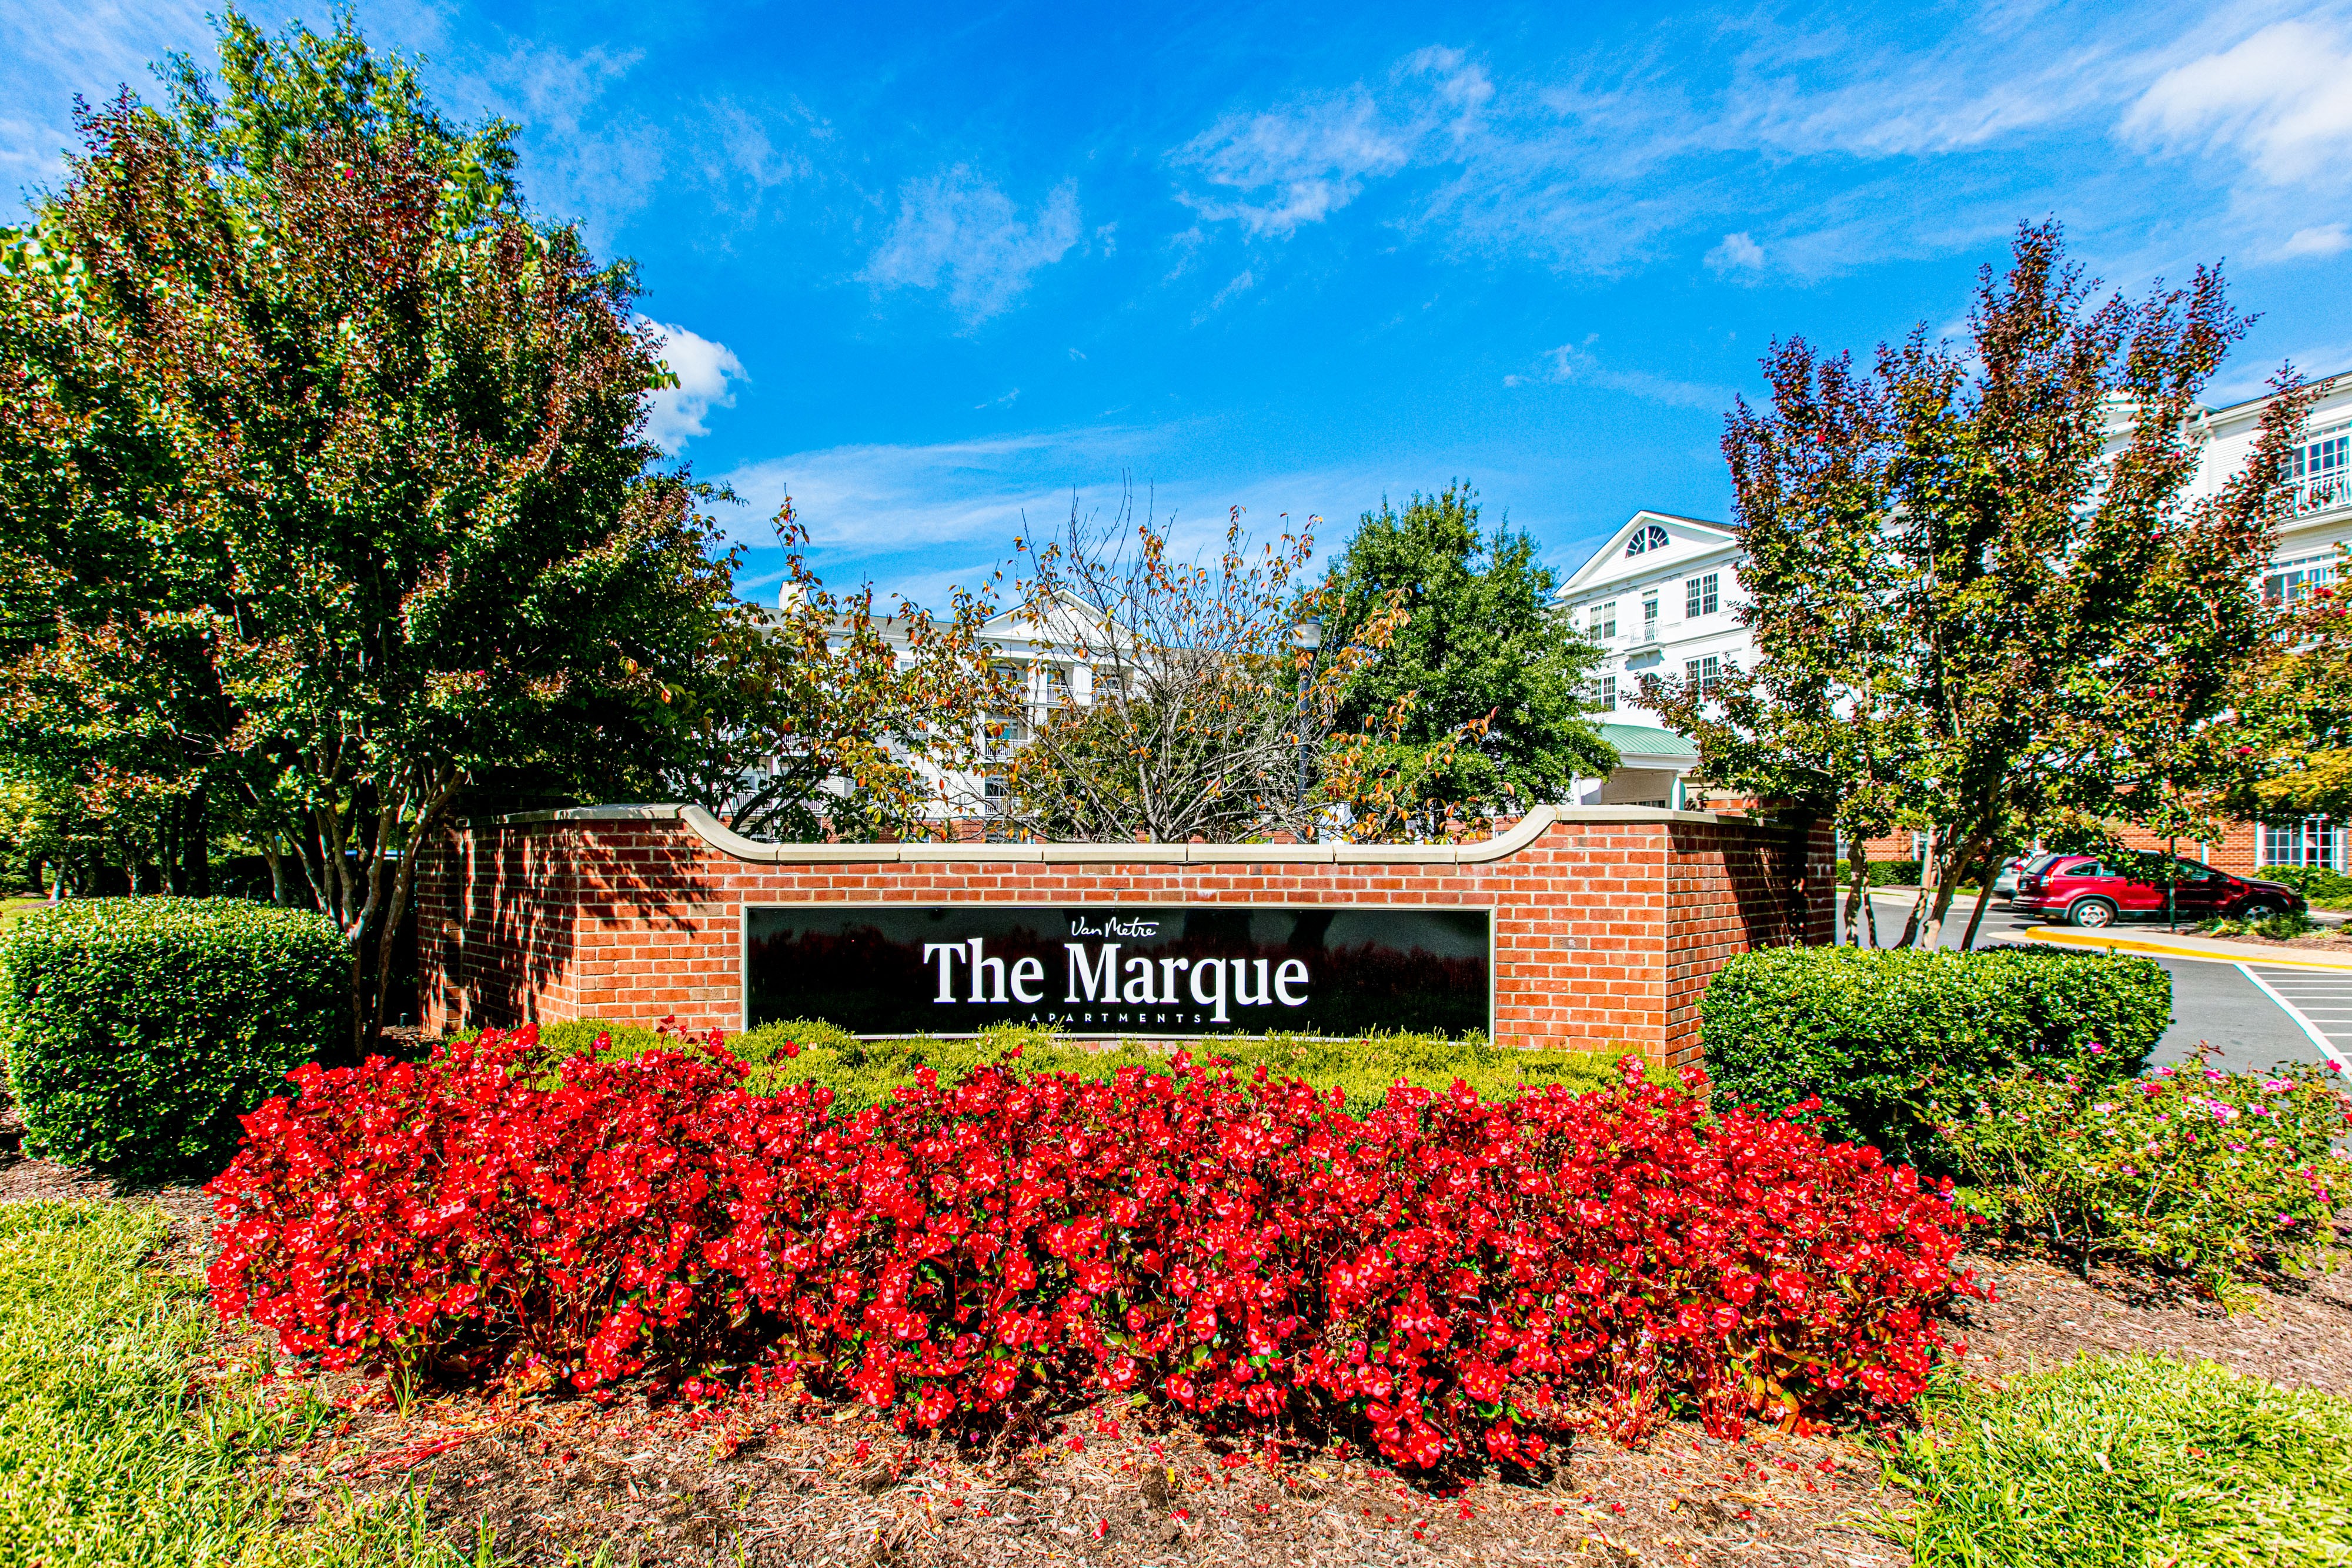 Welcome to The Marque!